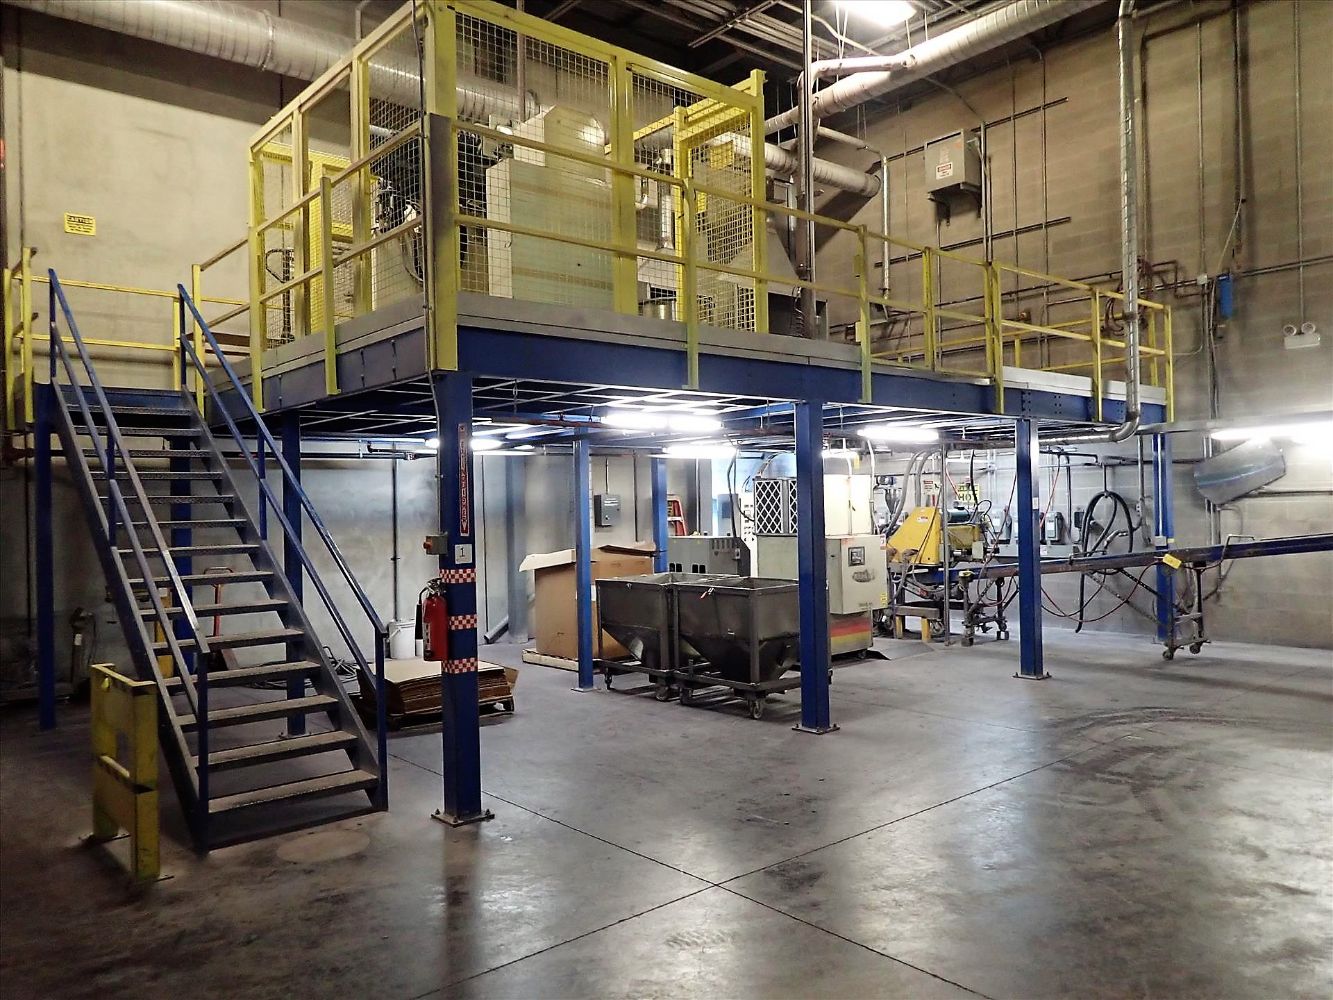 TCI POWDER COATING CANADA - COMPLETE COMPOUNDING FACILITY TO MANUFACTURE POWDER COATING MATERIALS